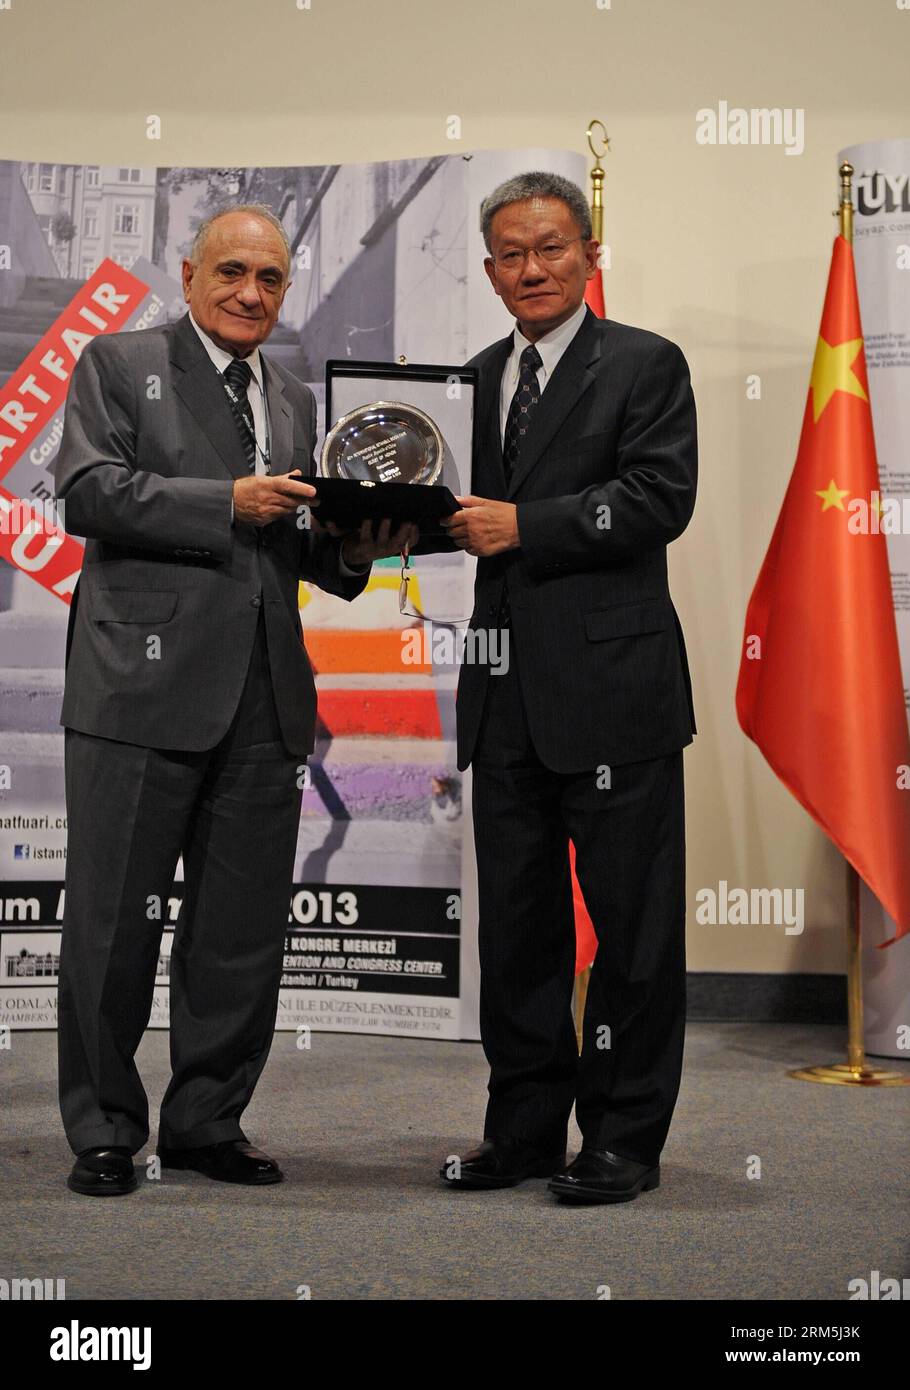 Bildnummer: 60668121  Datum: 02.11.2013  Copyright: imago/Xinhua CEO of Tuyap Bulent Unal presents a souvenir to Wu Shulin, deputy director of the General Administration of Press and Publications of China during the opening ceremony of the 32nd International Istanbul Book Fair in Istanbul, Turkey, on Nov. 2, 2013. The 32nd International Istanbul Book Fair opened here on Saturday. More than 650 publishers from 40 countries and regions attended the 9-day fair. China is the country of honor for the event. (Xinhua/Lu Zhe) (dzl) TURKEY-ISTANBUL-BOOK FAIR PUBLICATIONxNOTxINxCHN Wirtschaft Messe x0x Stock Photo